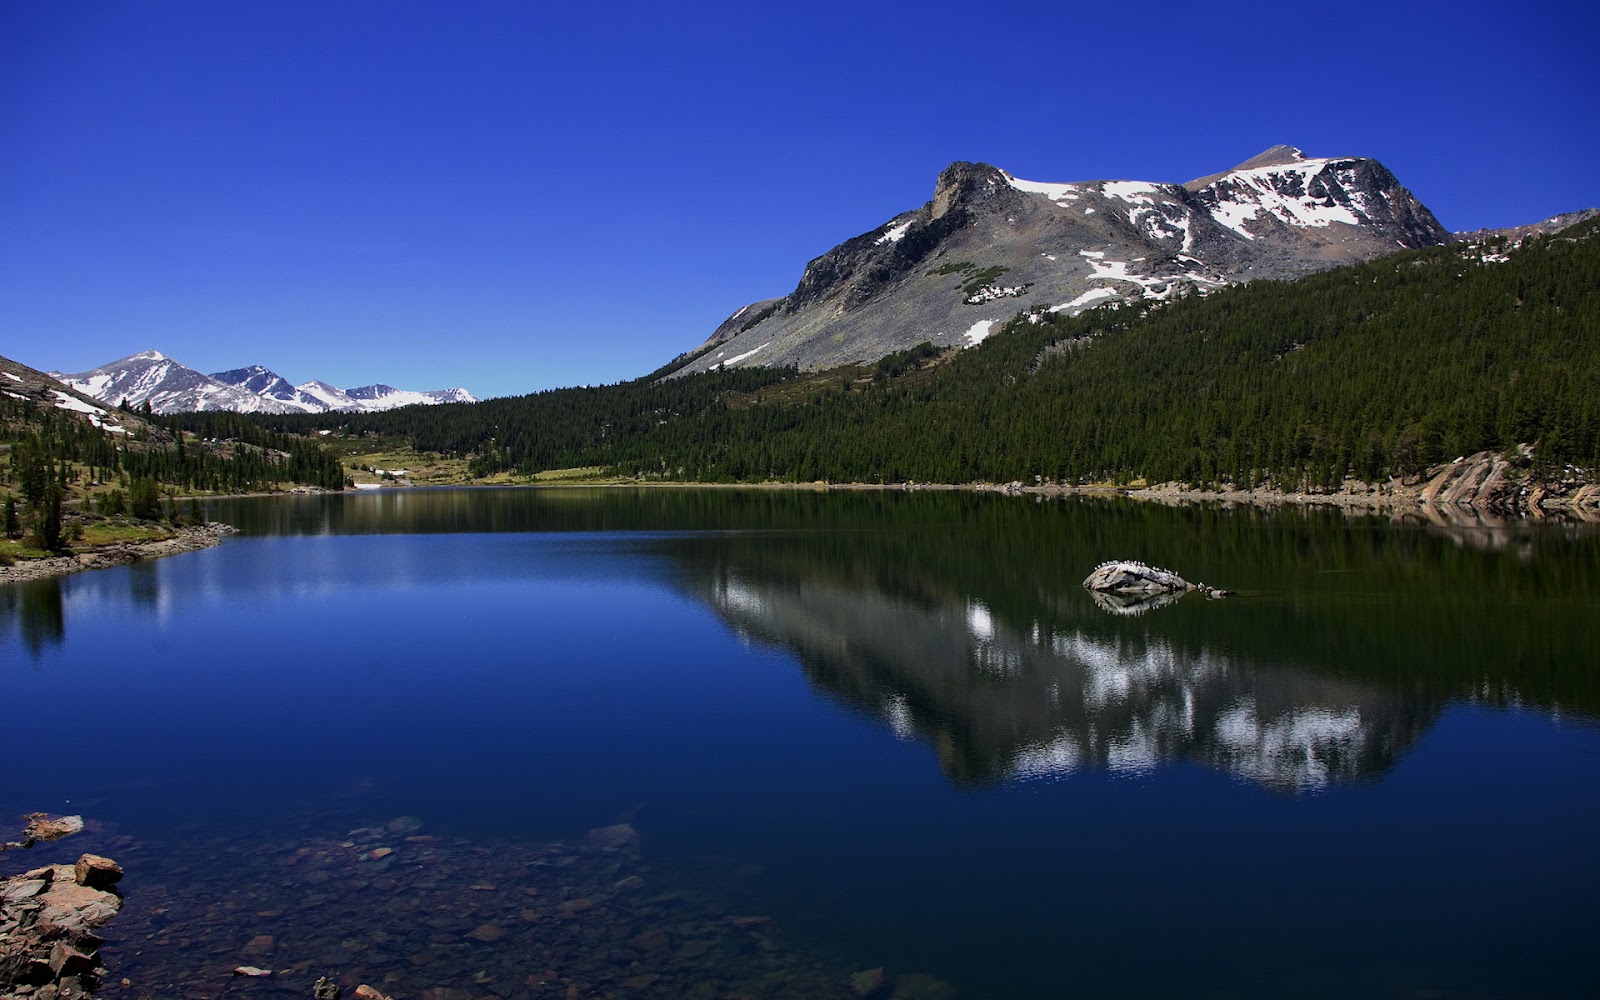 nature images wallpapers,mountain,reflection,mountainous landforms,body of water,nature